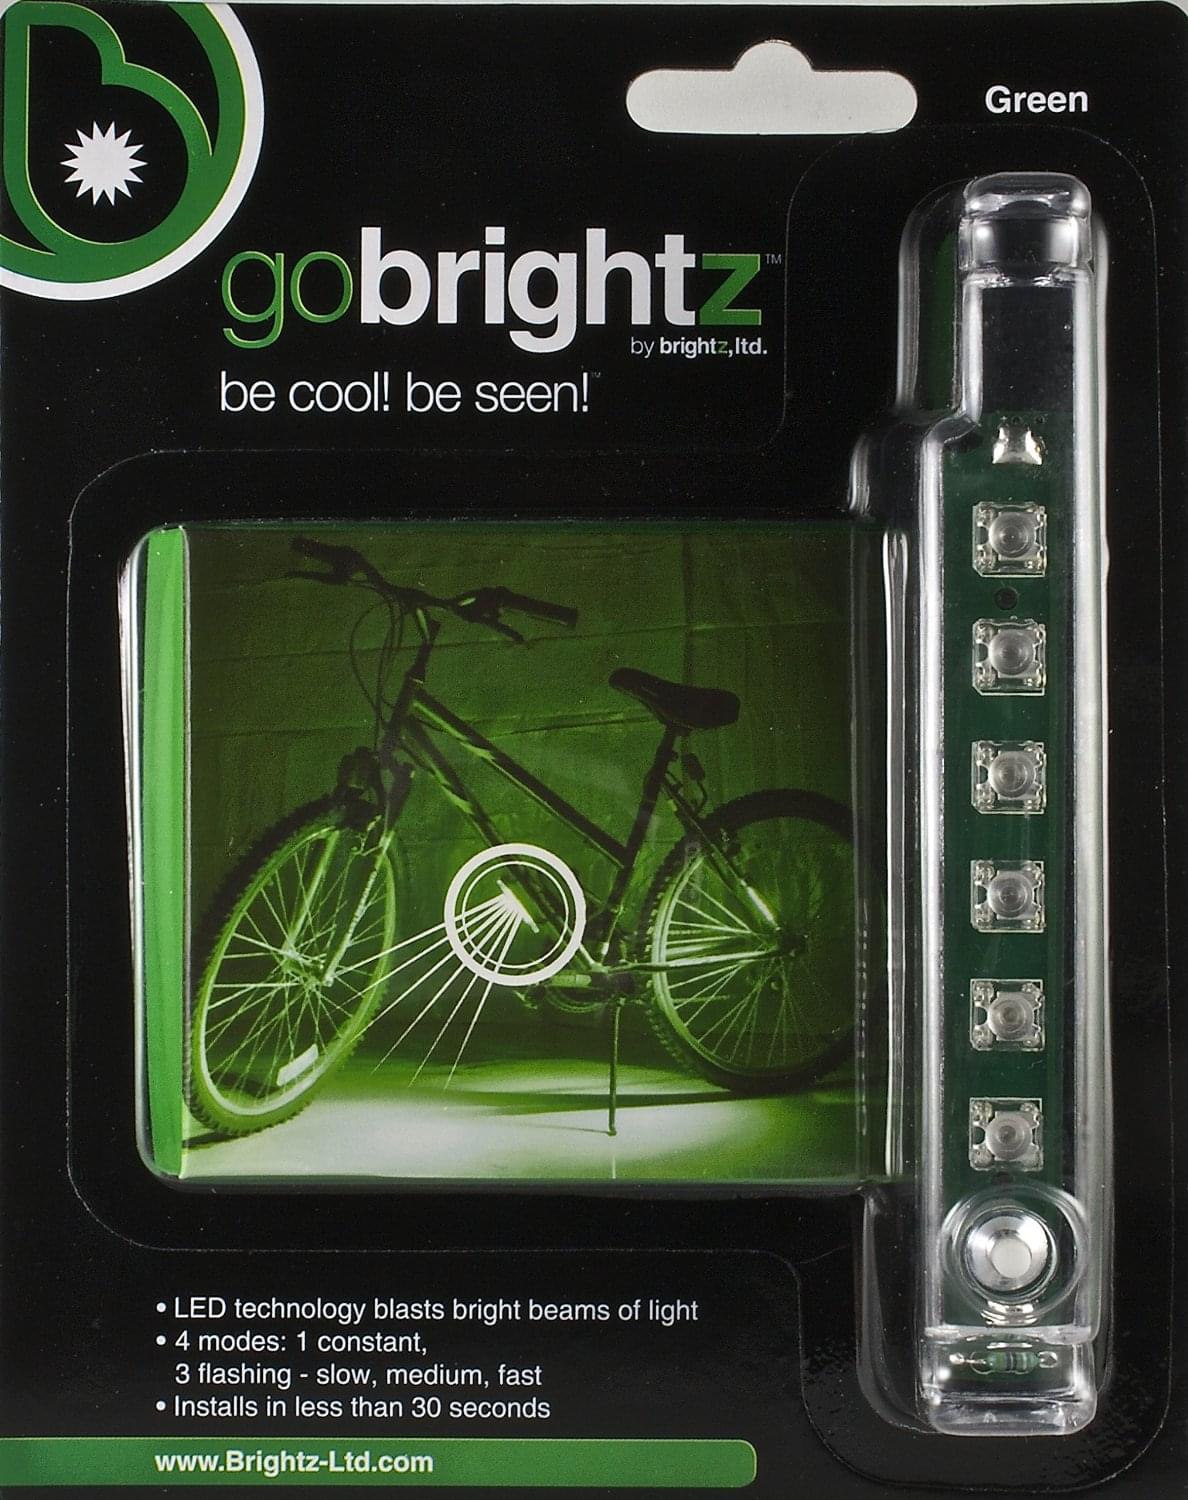 Brightz LED Bicycle Safety Light Cycling Bike Accessory Green